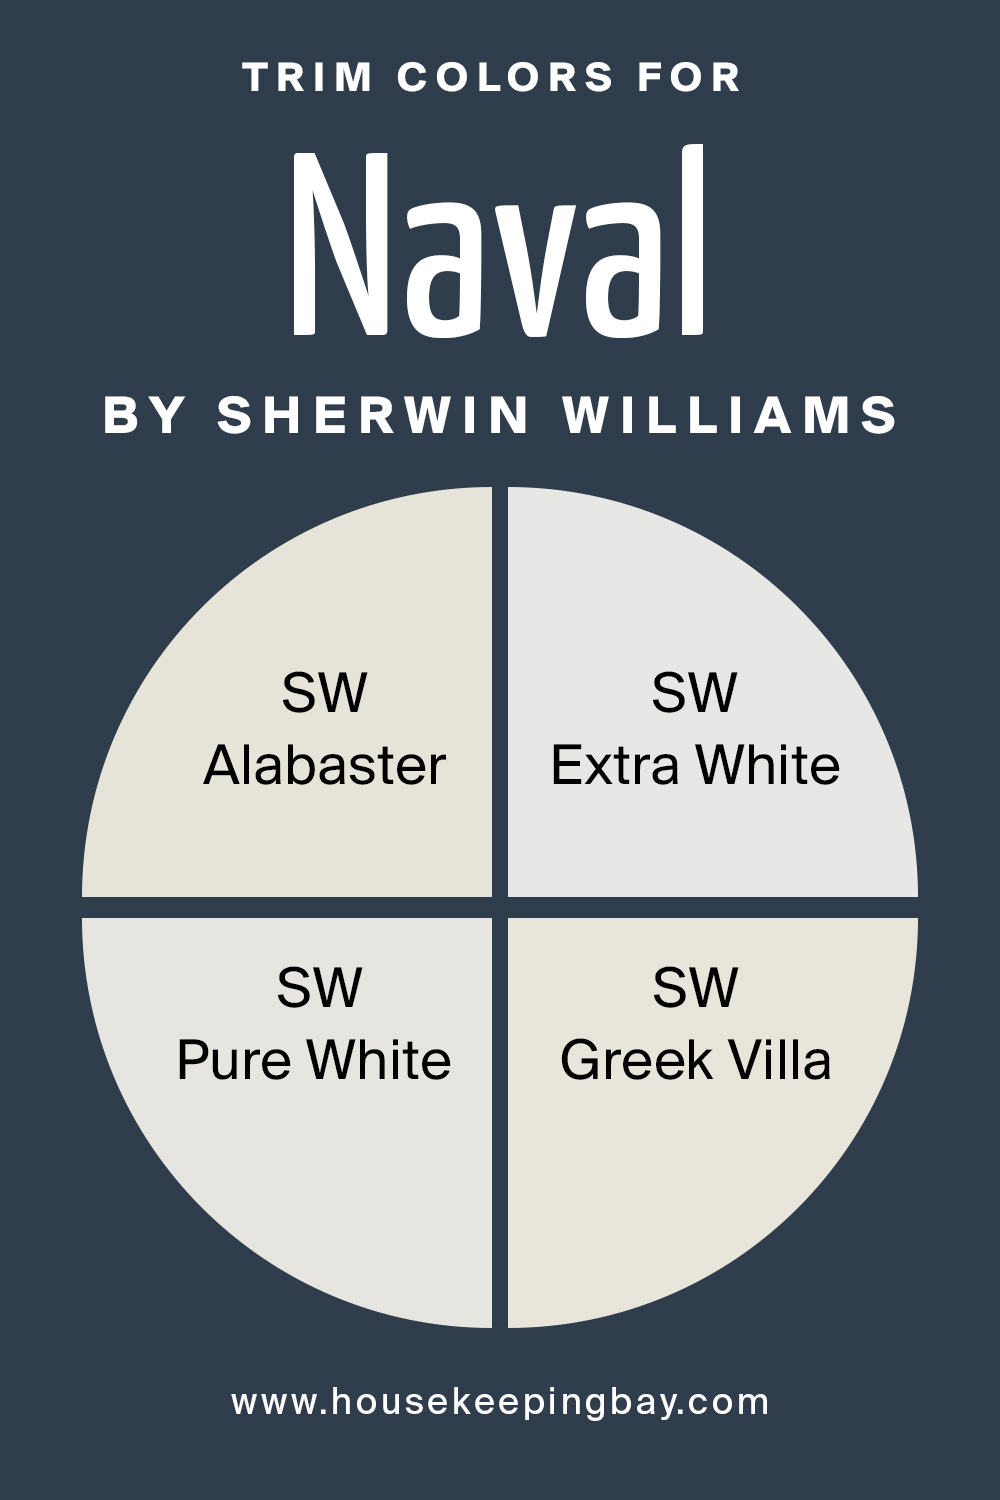 Trim Colors for Naval by Sherwin Williams